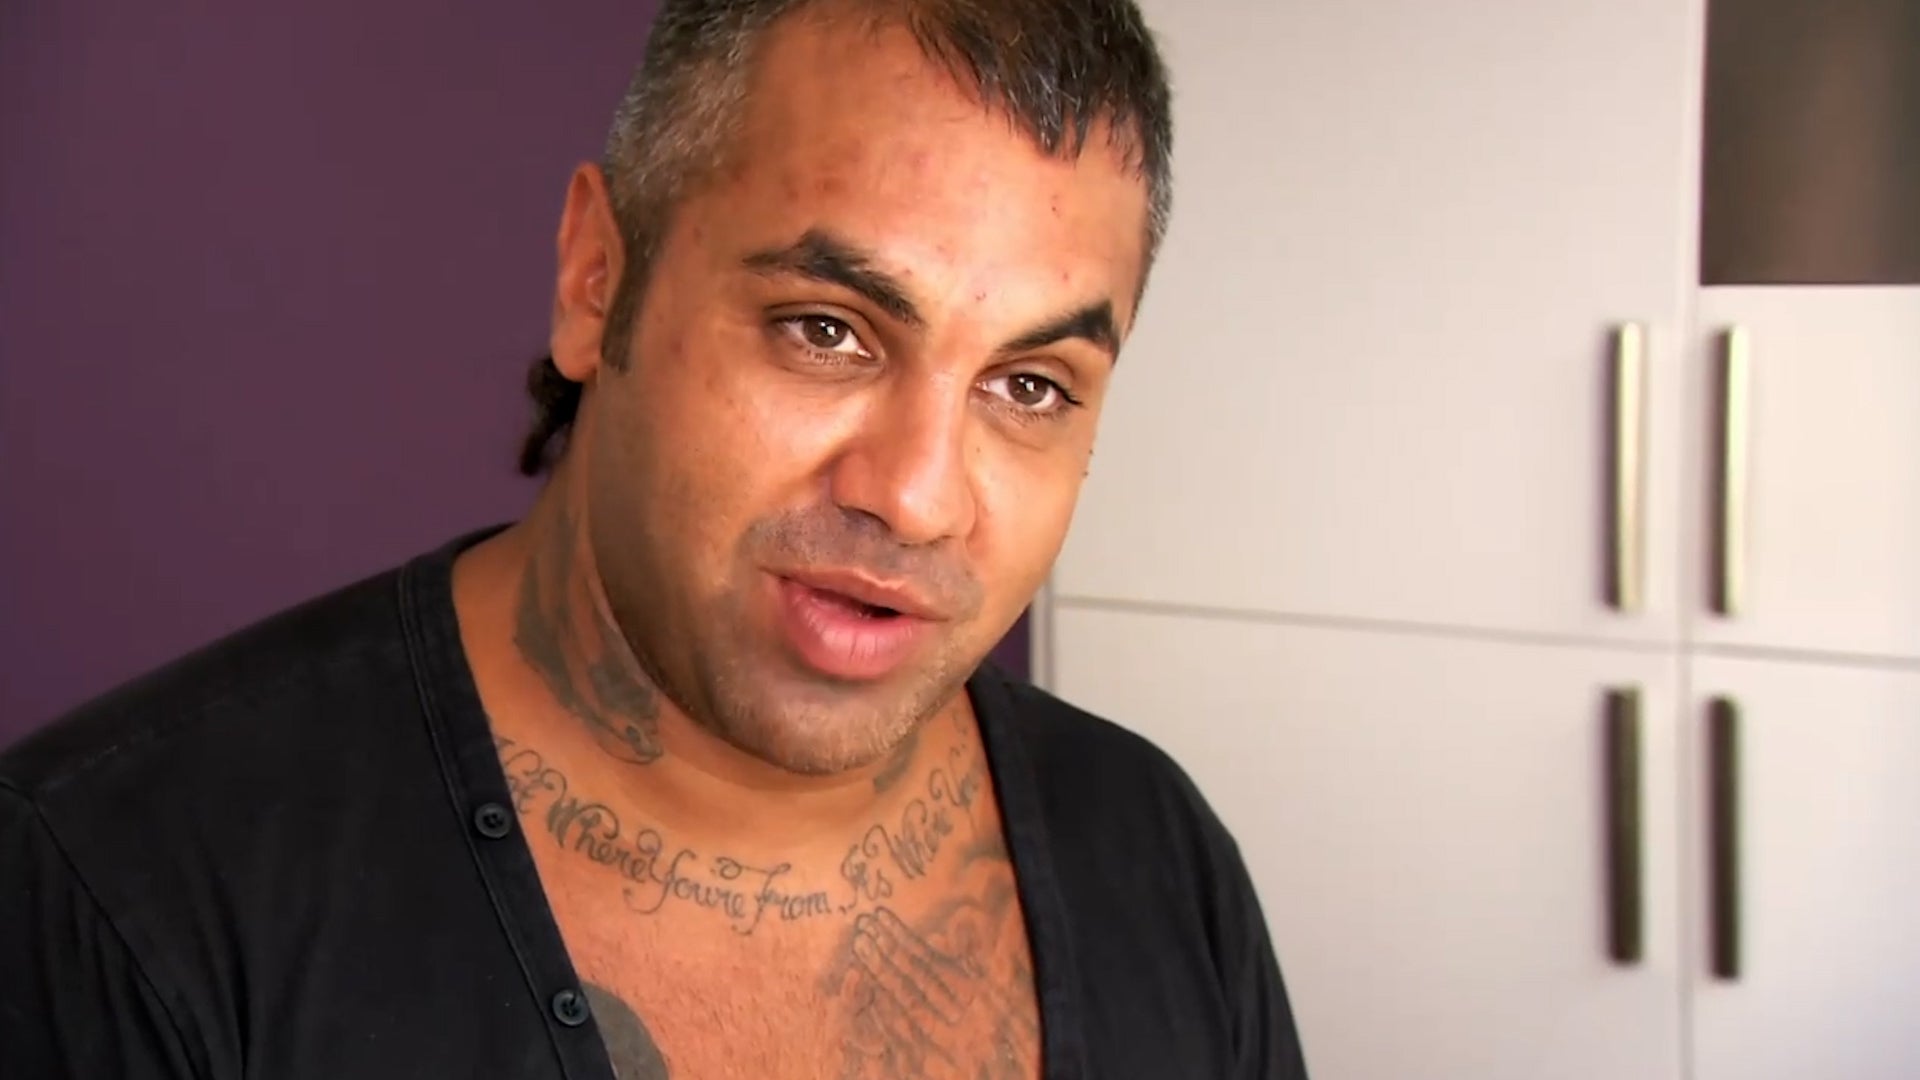 Indy Nijjar, star of Come Dine with Me, has died aged 50